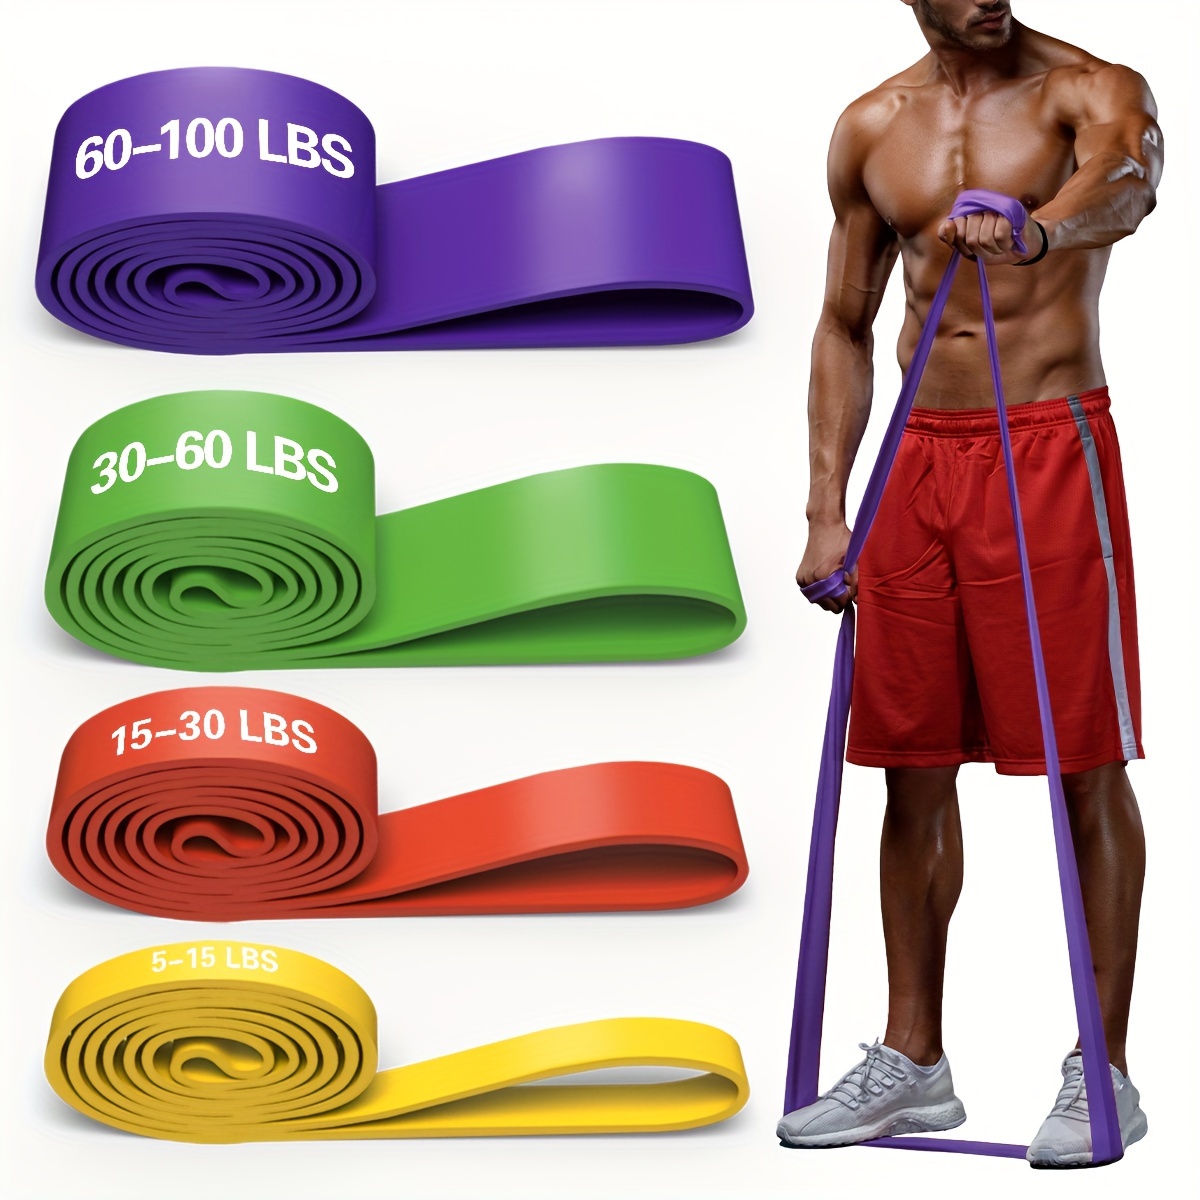 

4pcs/set Sports Yoga Resistance Bands, Fitness Pull Rope, Suitable For Leg Training, Fitness Squats Exercise